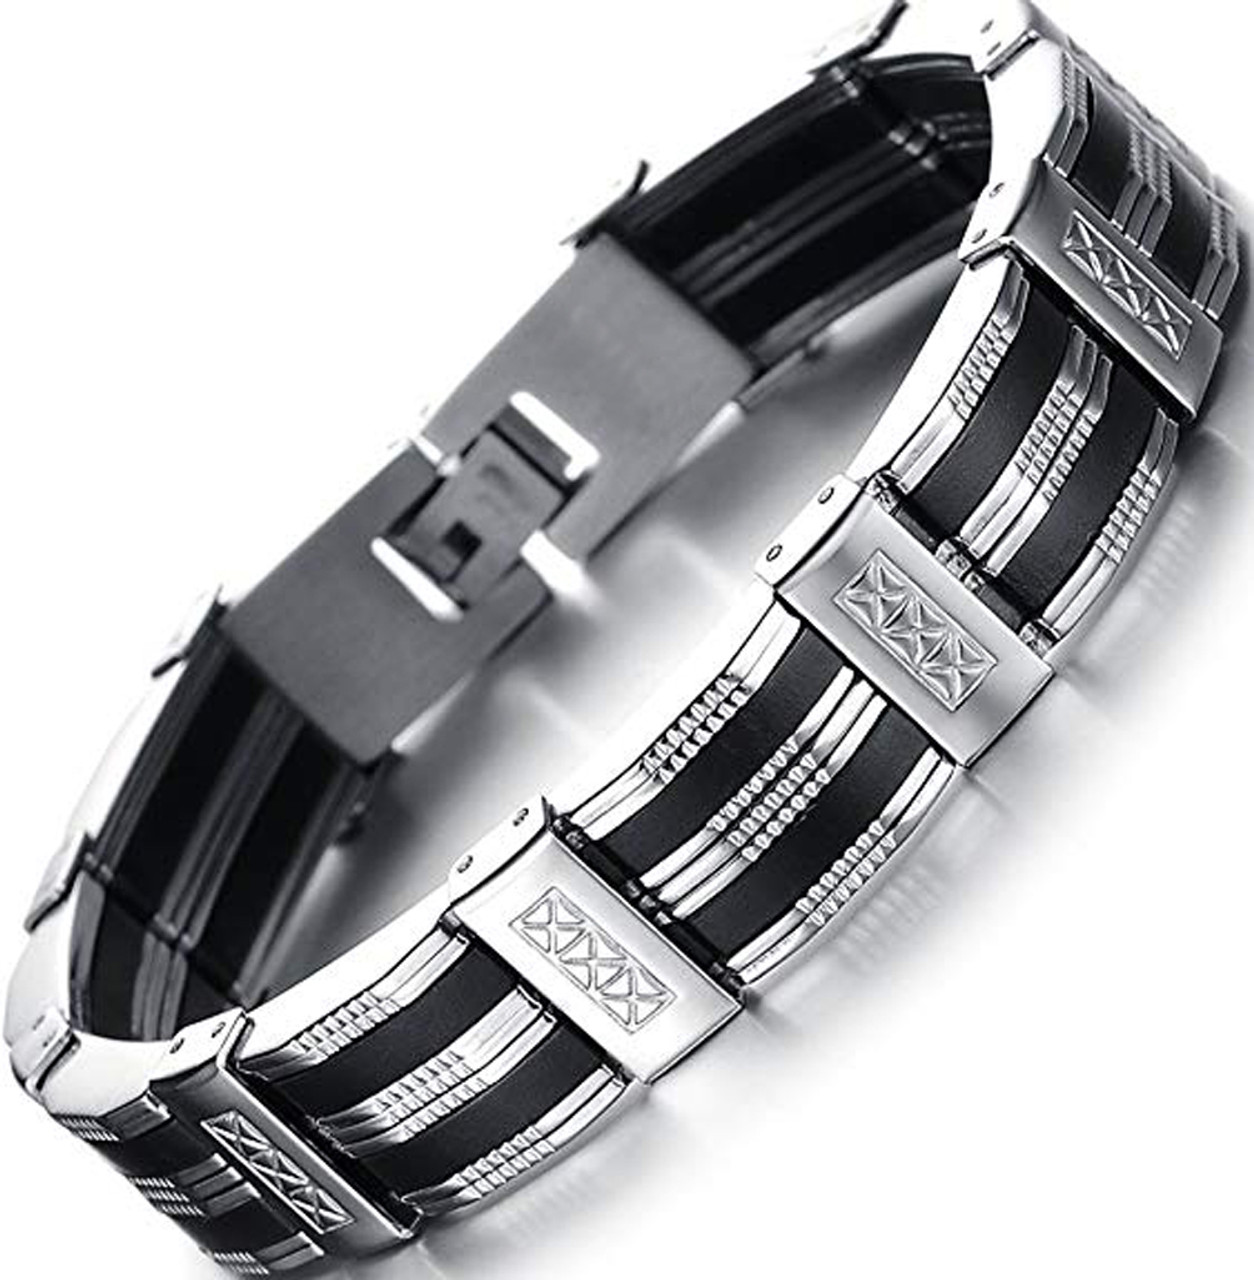 8.5" Inch Length - Black and Silver Unisex or Men's Bracelet. Two tone style Wedding Bracelet or Gift for Him.